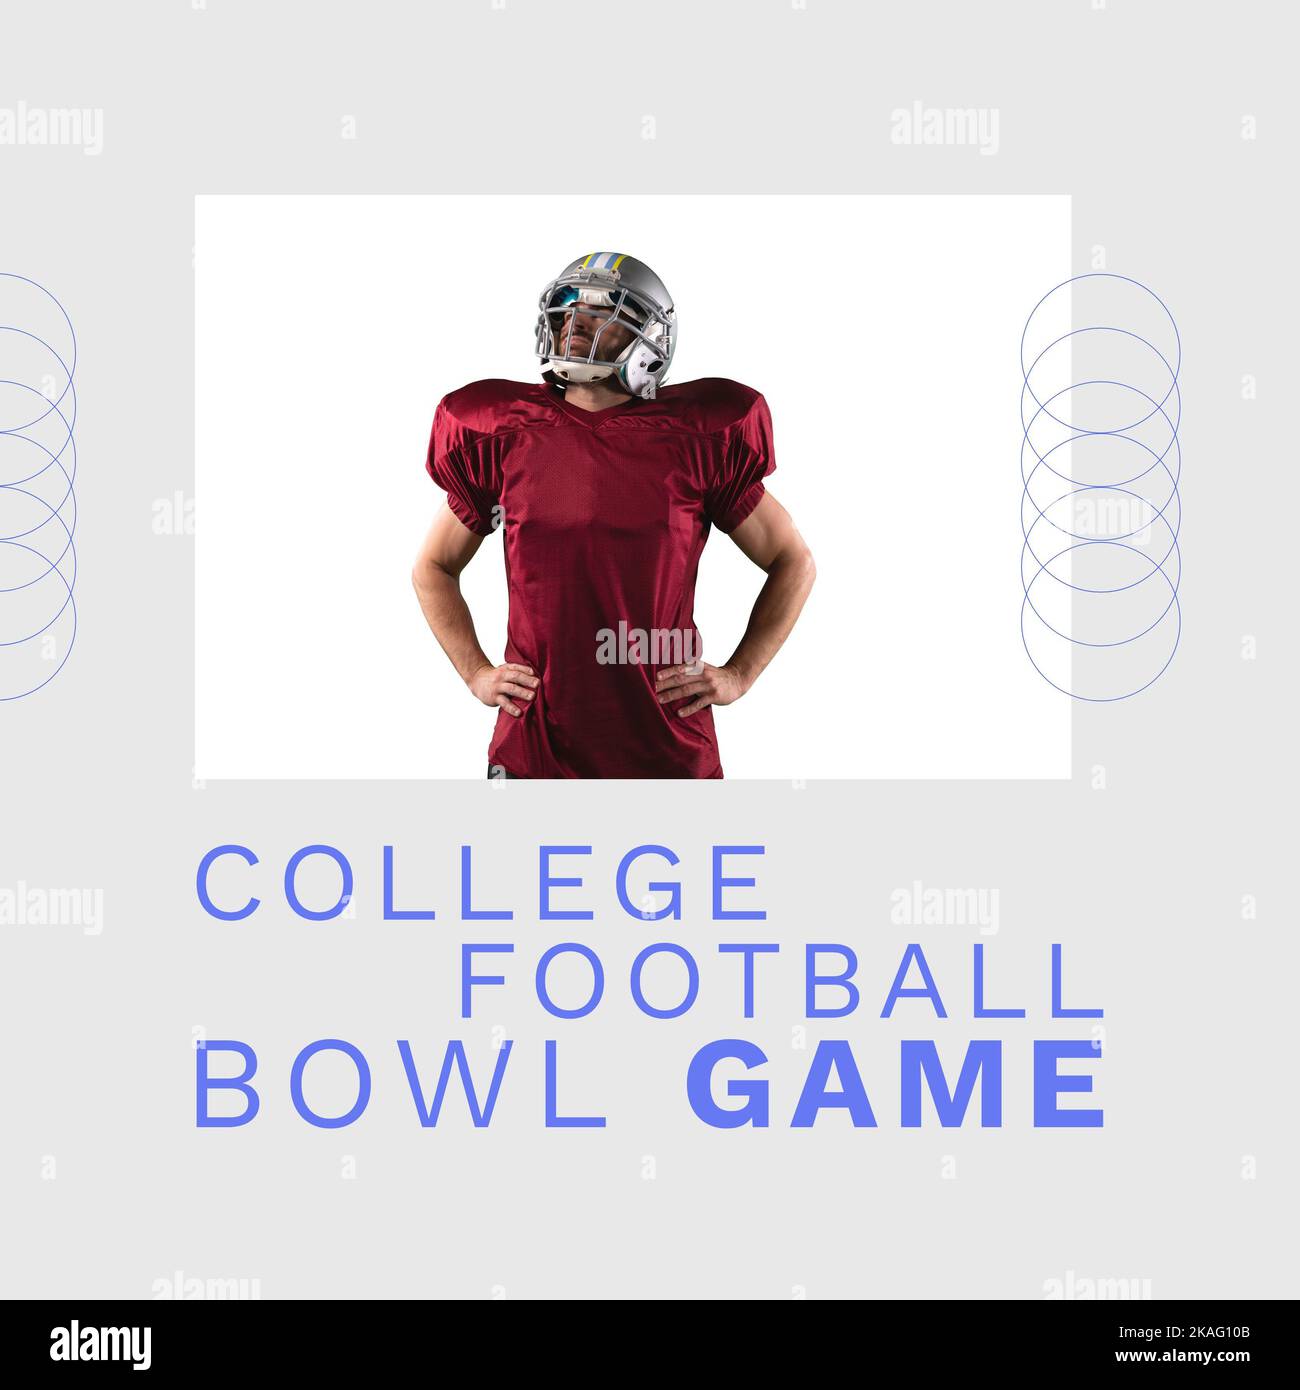 Composition of college football bowl game text and biracial male player Stock Photo